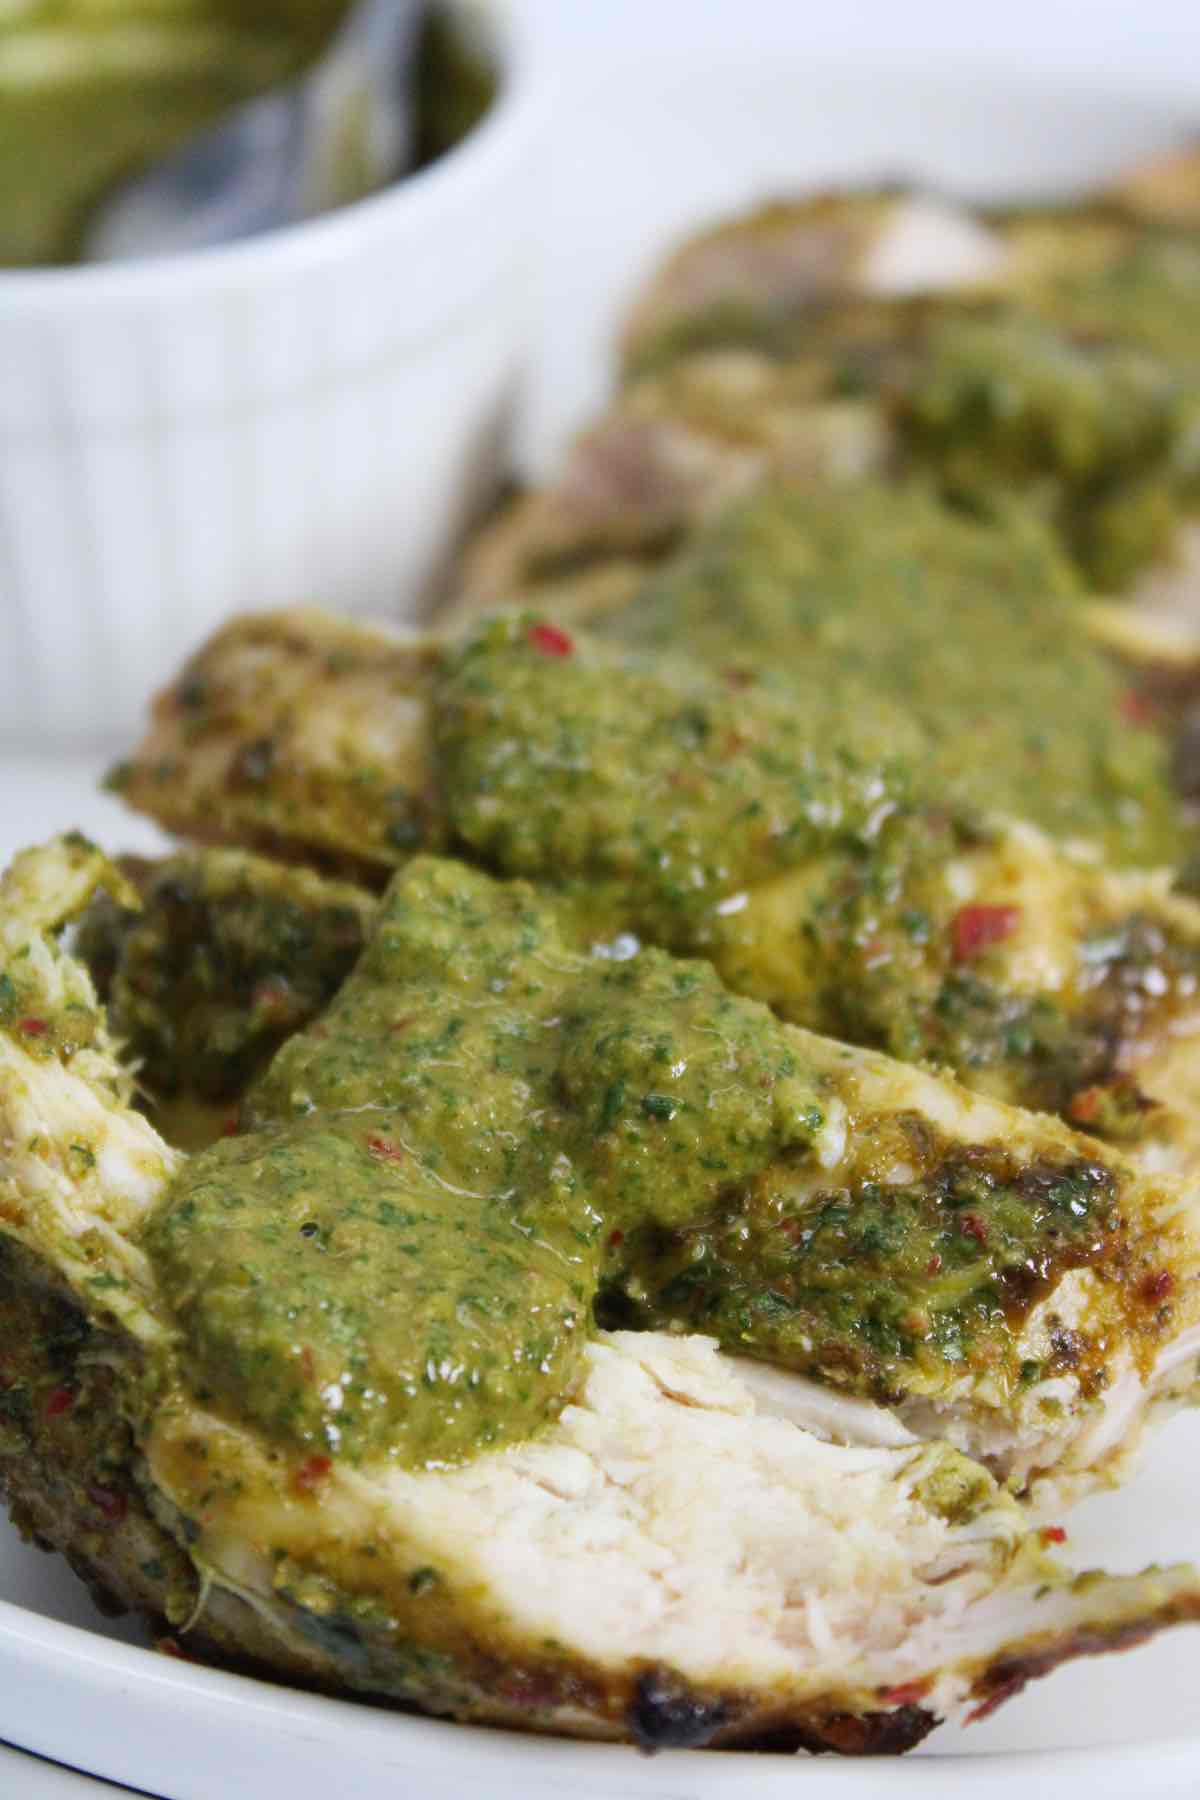 This grilled chimichurri chicken breast recipe is the perfect summer meal to make on the bbq grill.